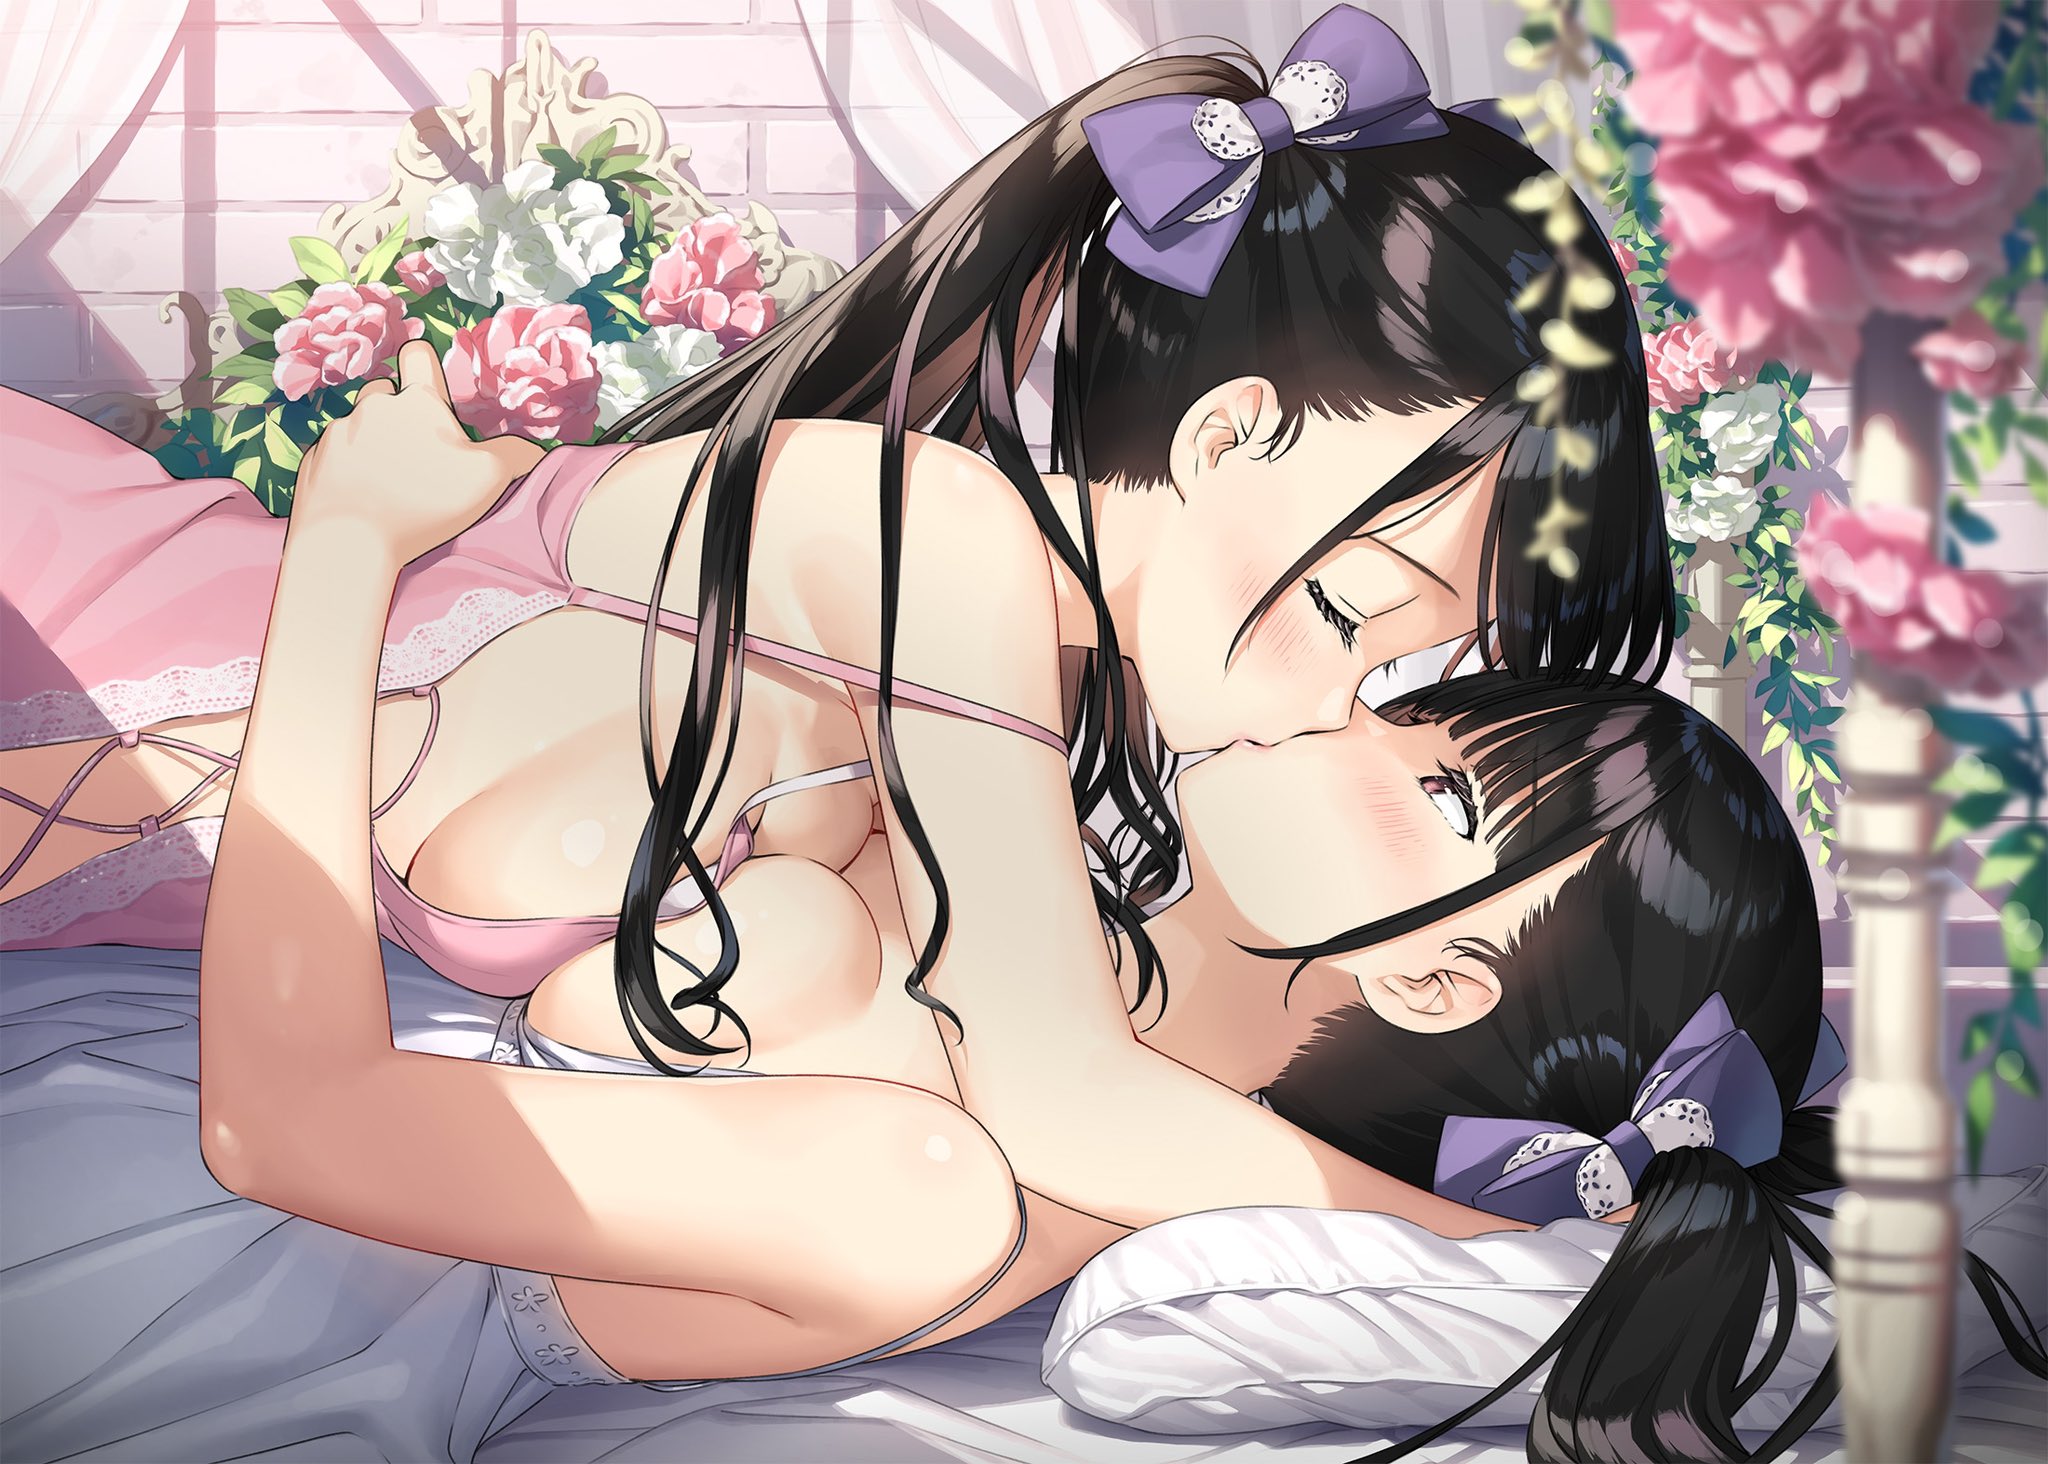 Anime 2048x1464 Kantoku two women straddling black hair hair ribbon big boobs kissing boobs on boobs pressed boobs lingerie profile lying on back lying down long hair bare shoulders sisters underwear purple bow brown eyes nightgown hugging pink flowers white flowers in bed blushing closed mouth pillow yuri twins anime anime girls